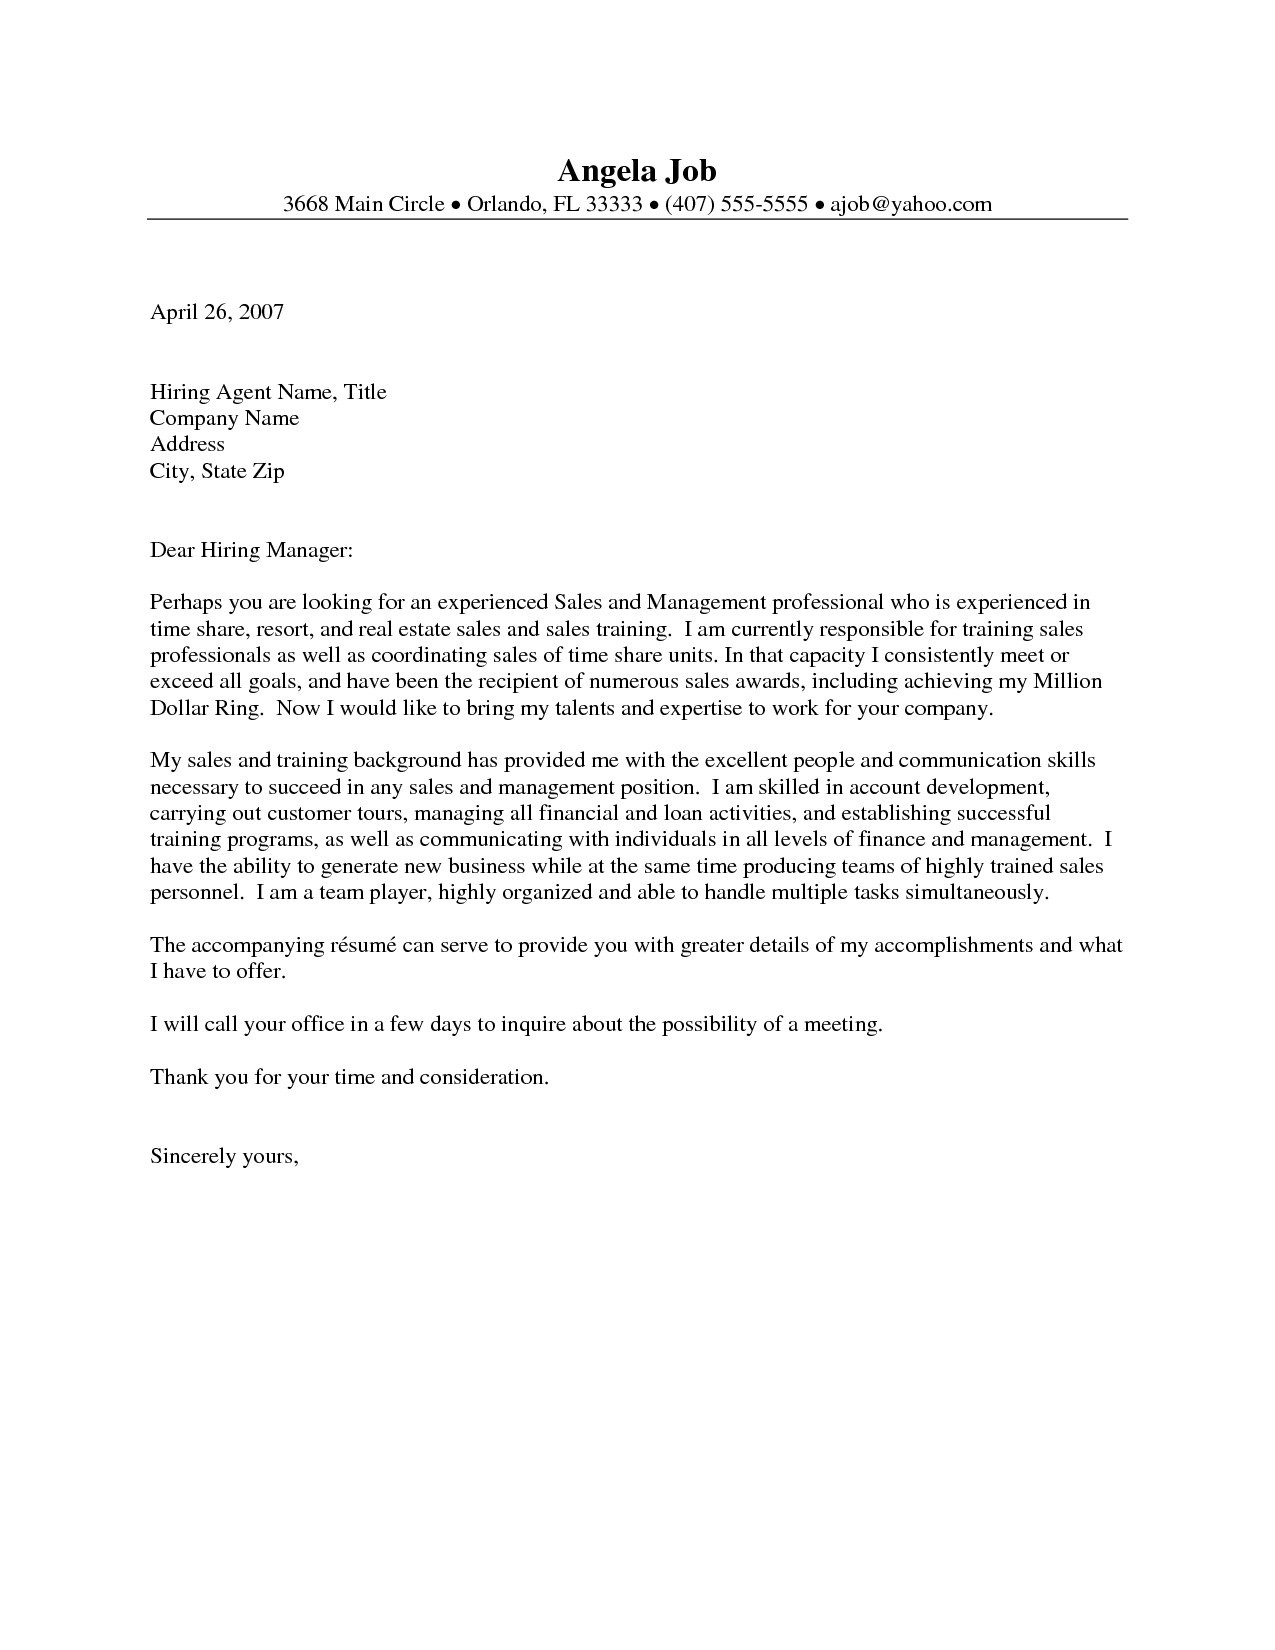 real estate introduction letter template example-Cover Letter Sample for Real Estate Job New Sample Cover Letter for Real Estate Job Valid 12-f